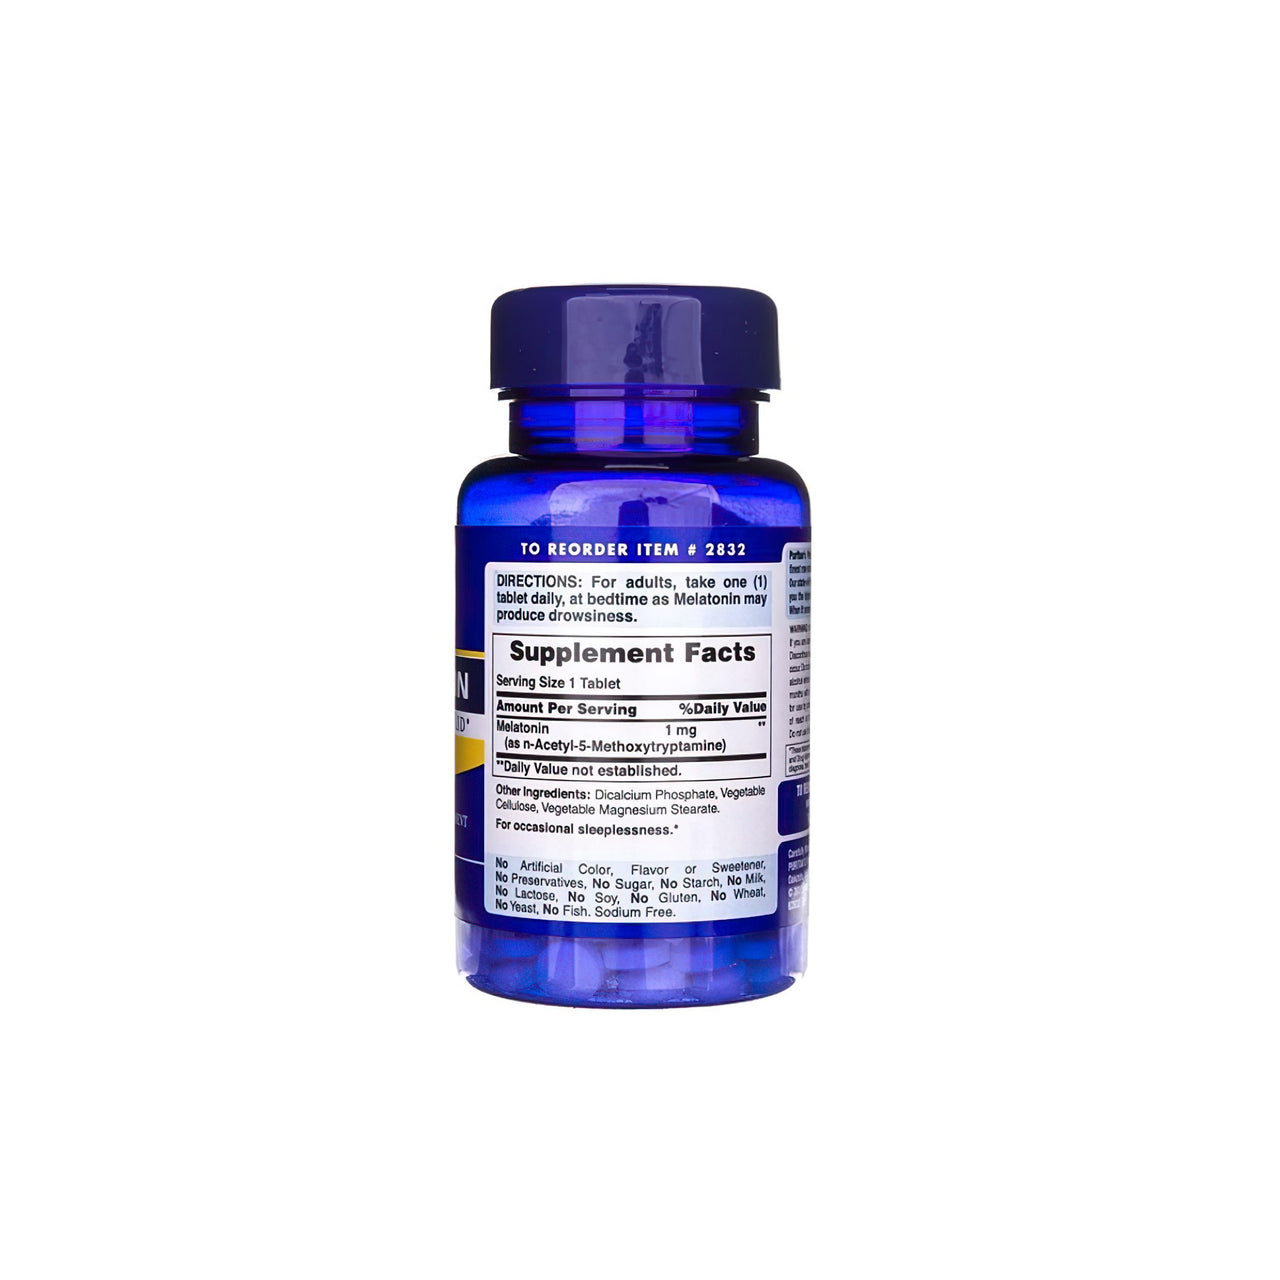 A bottle of Puritan's Pride Melatonin 1 mg 90 Tablets on a white background.